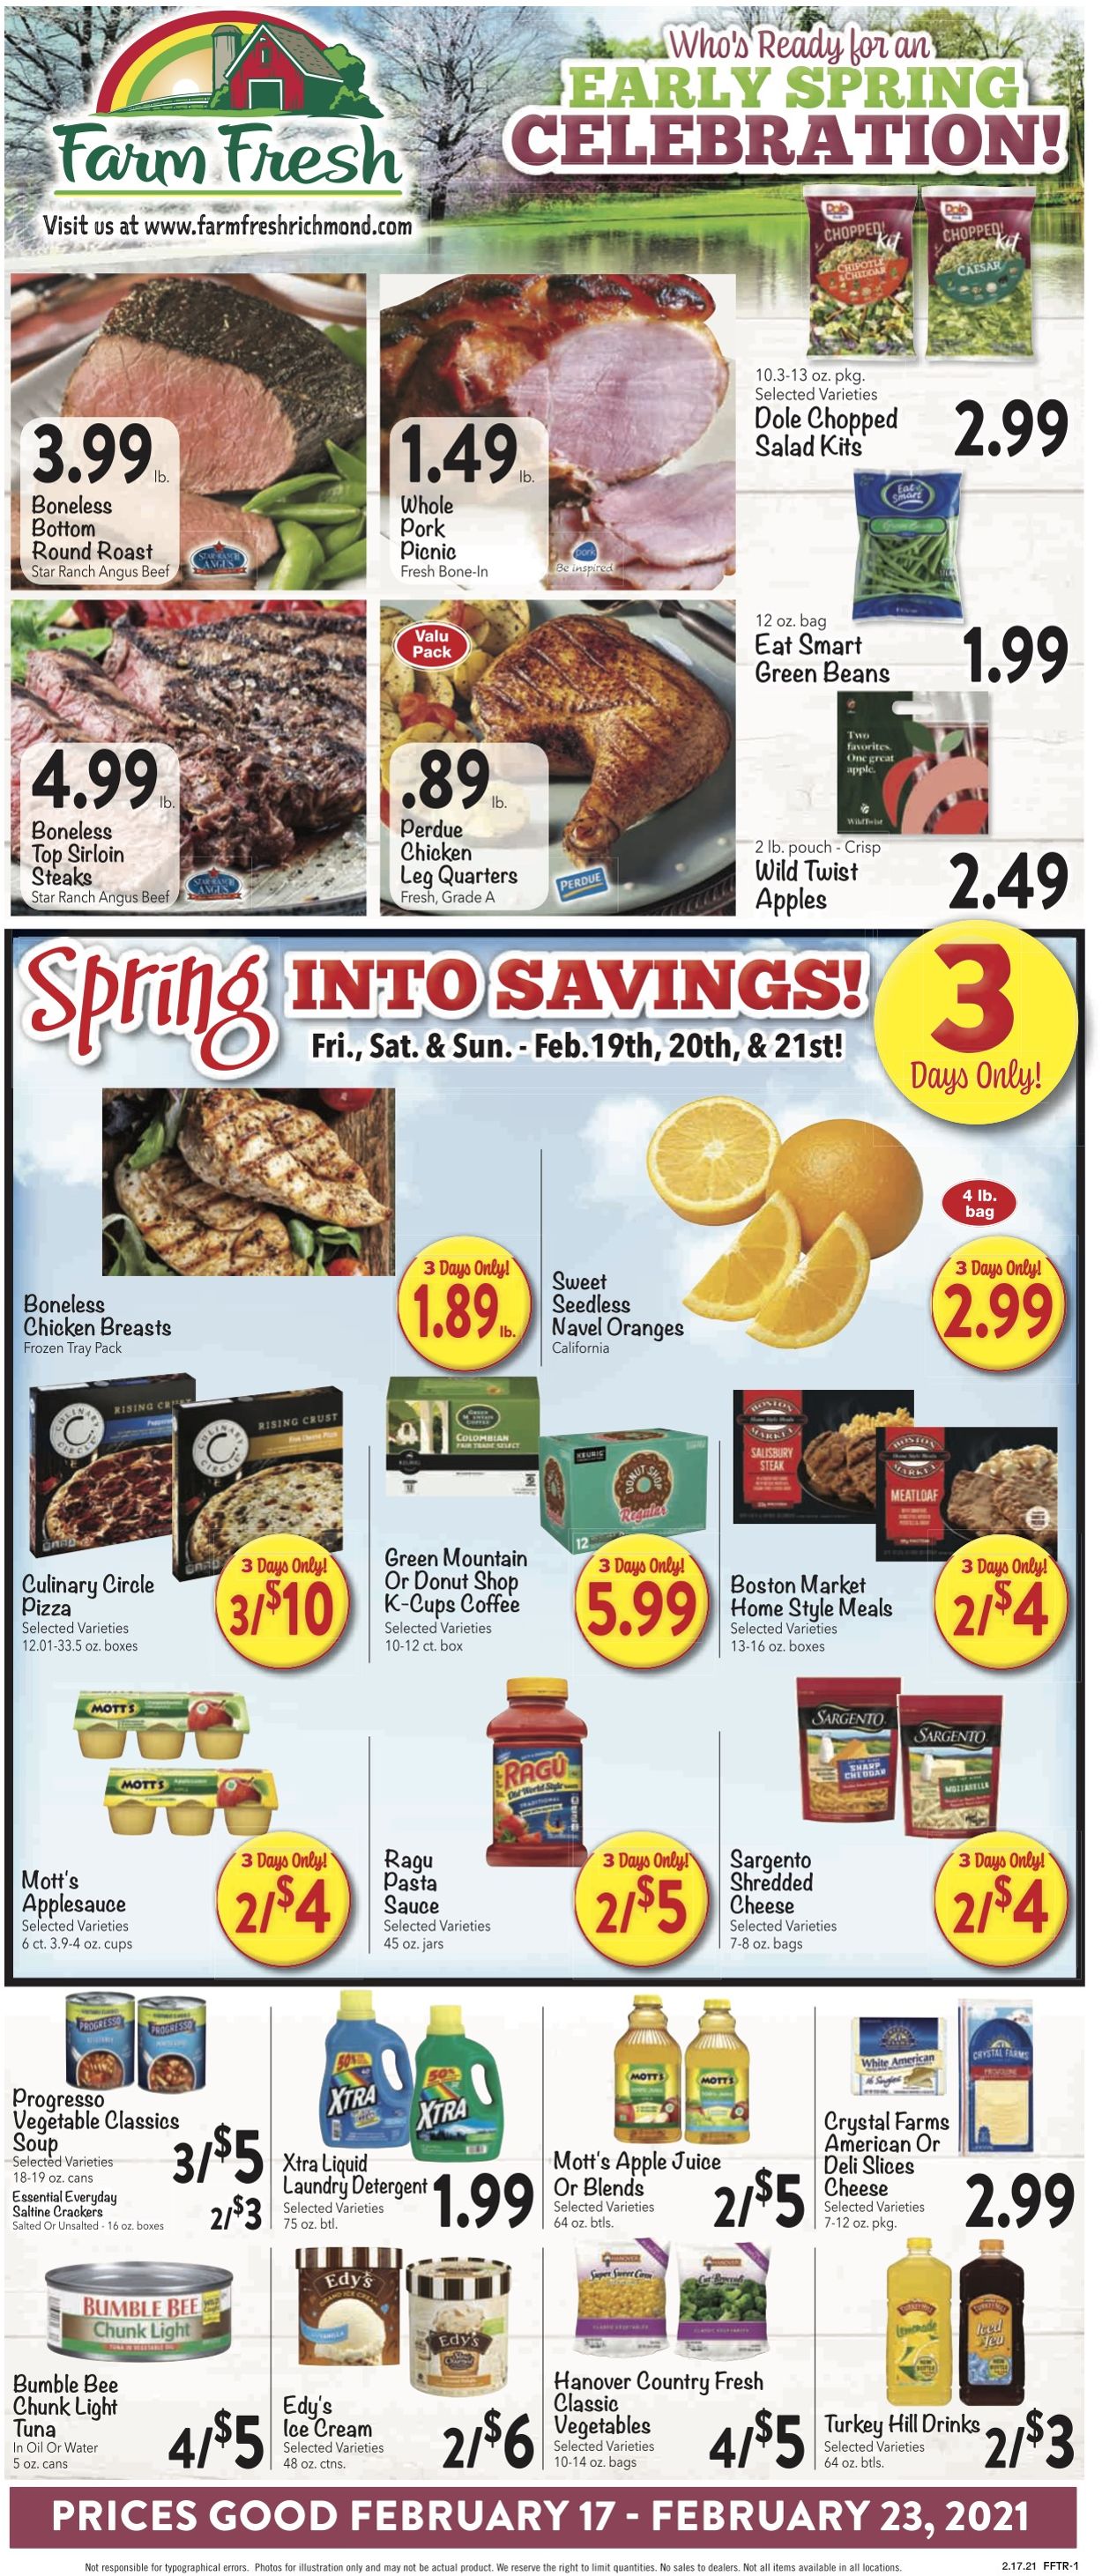 Farm Fresh Current weekly ad 02/17 - 02/23/2021 - frequent-ads.com